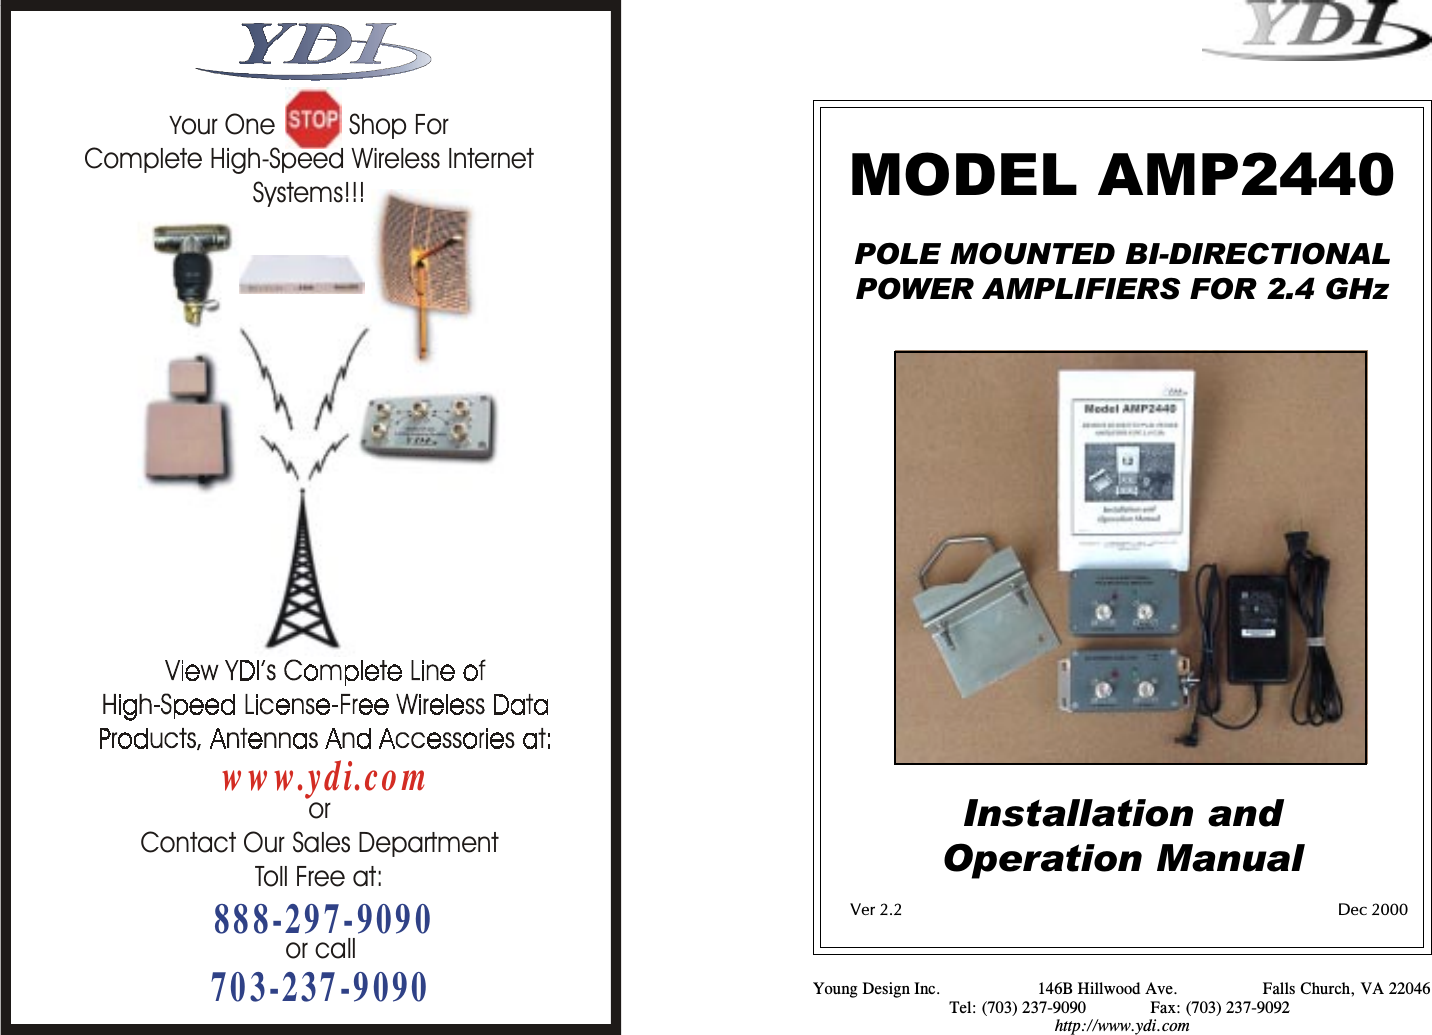   Model AMP2440 REMOTE BI-DIRECTIONAL POWER AMPLIFIERS FOR 2.4 GHz Installation and  Operation Manual  Version 2.0                                                                                                                   May  2000   MODEL AMP2440POLE MOUNTED BI-DIRECTIONALPOWER AMPLIFIERS FOR 2.4 GHzInstallation andOperation ManualVer 2.2 Dec 2000Young Design Inc. 146B Hillwood Ave. Falls Church, VA 22046Tel: (703) 237-9090 Fax: (703) 237-9092http://www.ydi.com;our One          Shop For Complete High-Speed Wireless Internet Systems!!!www.ydi.comorContact Our Sales DepartmentToll Free at:888-297-9090703-237-9090or call